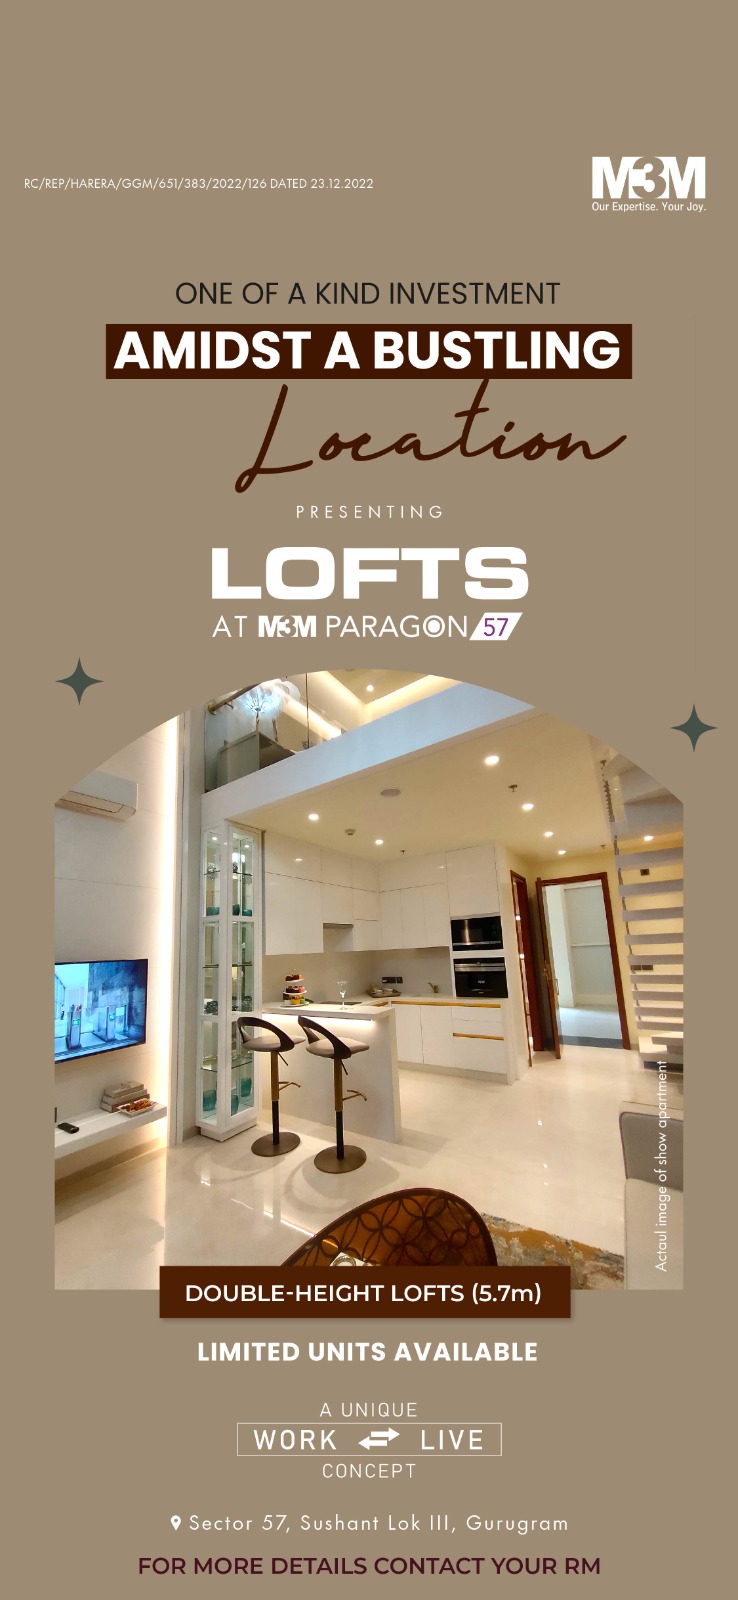 Limited units available at M3M Paragon in sector 57, Gurgaon Update